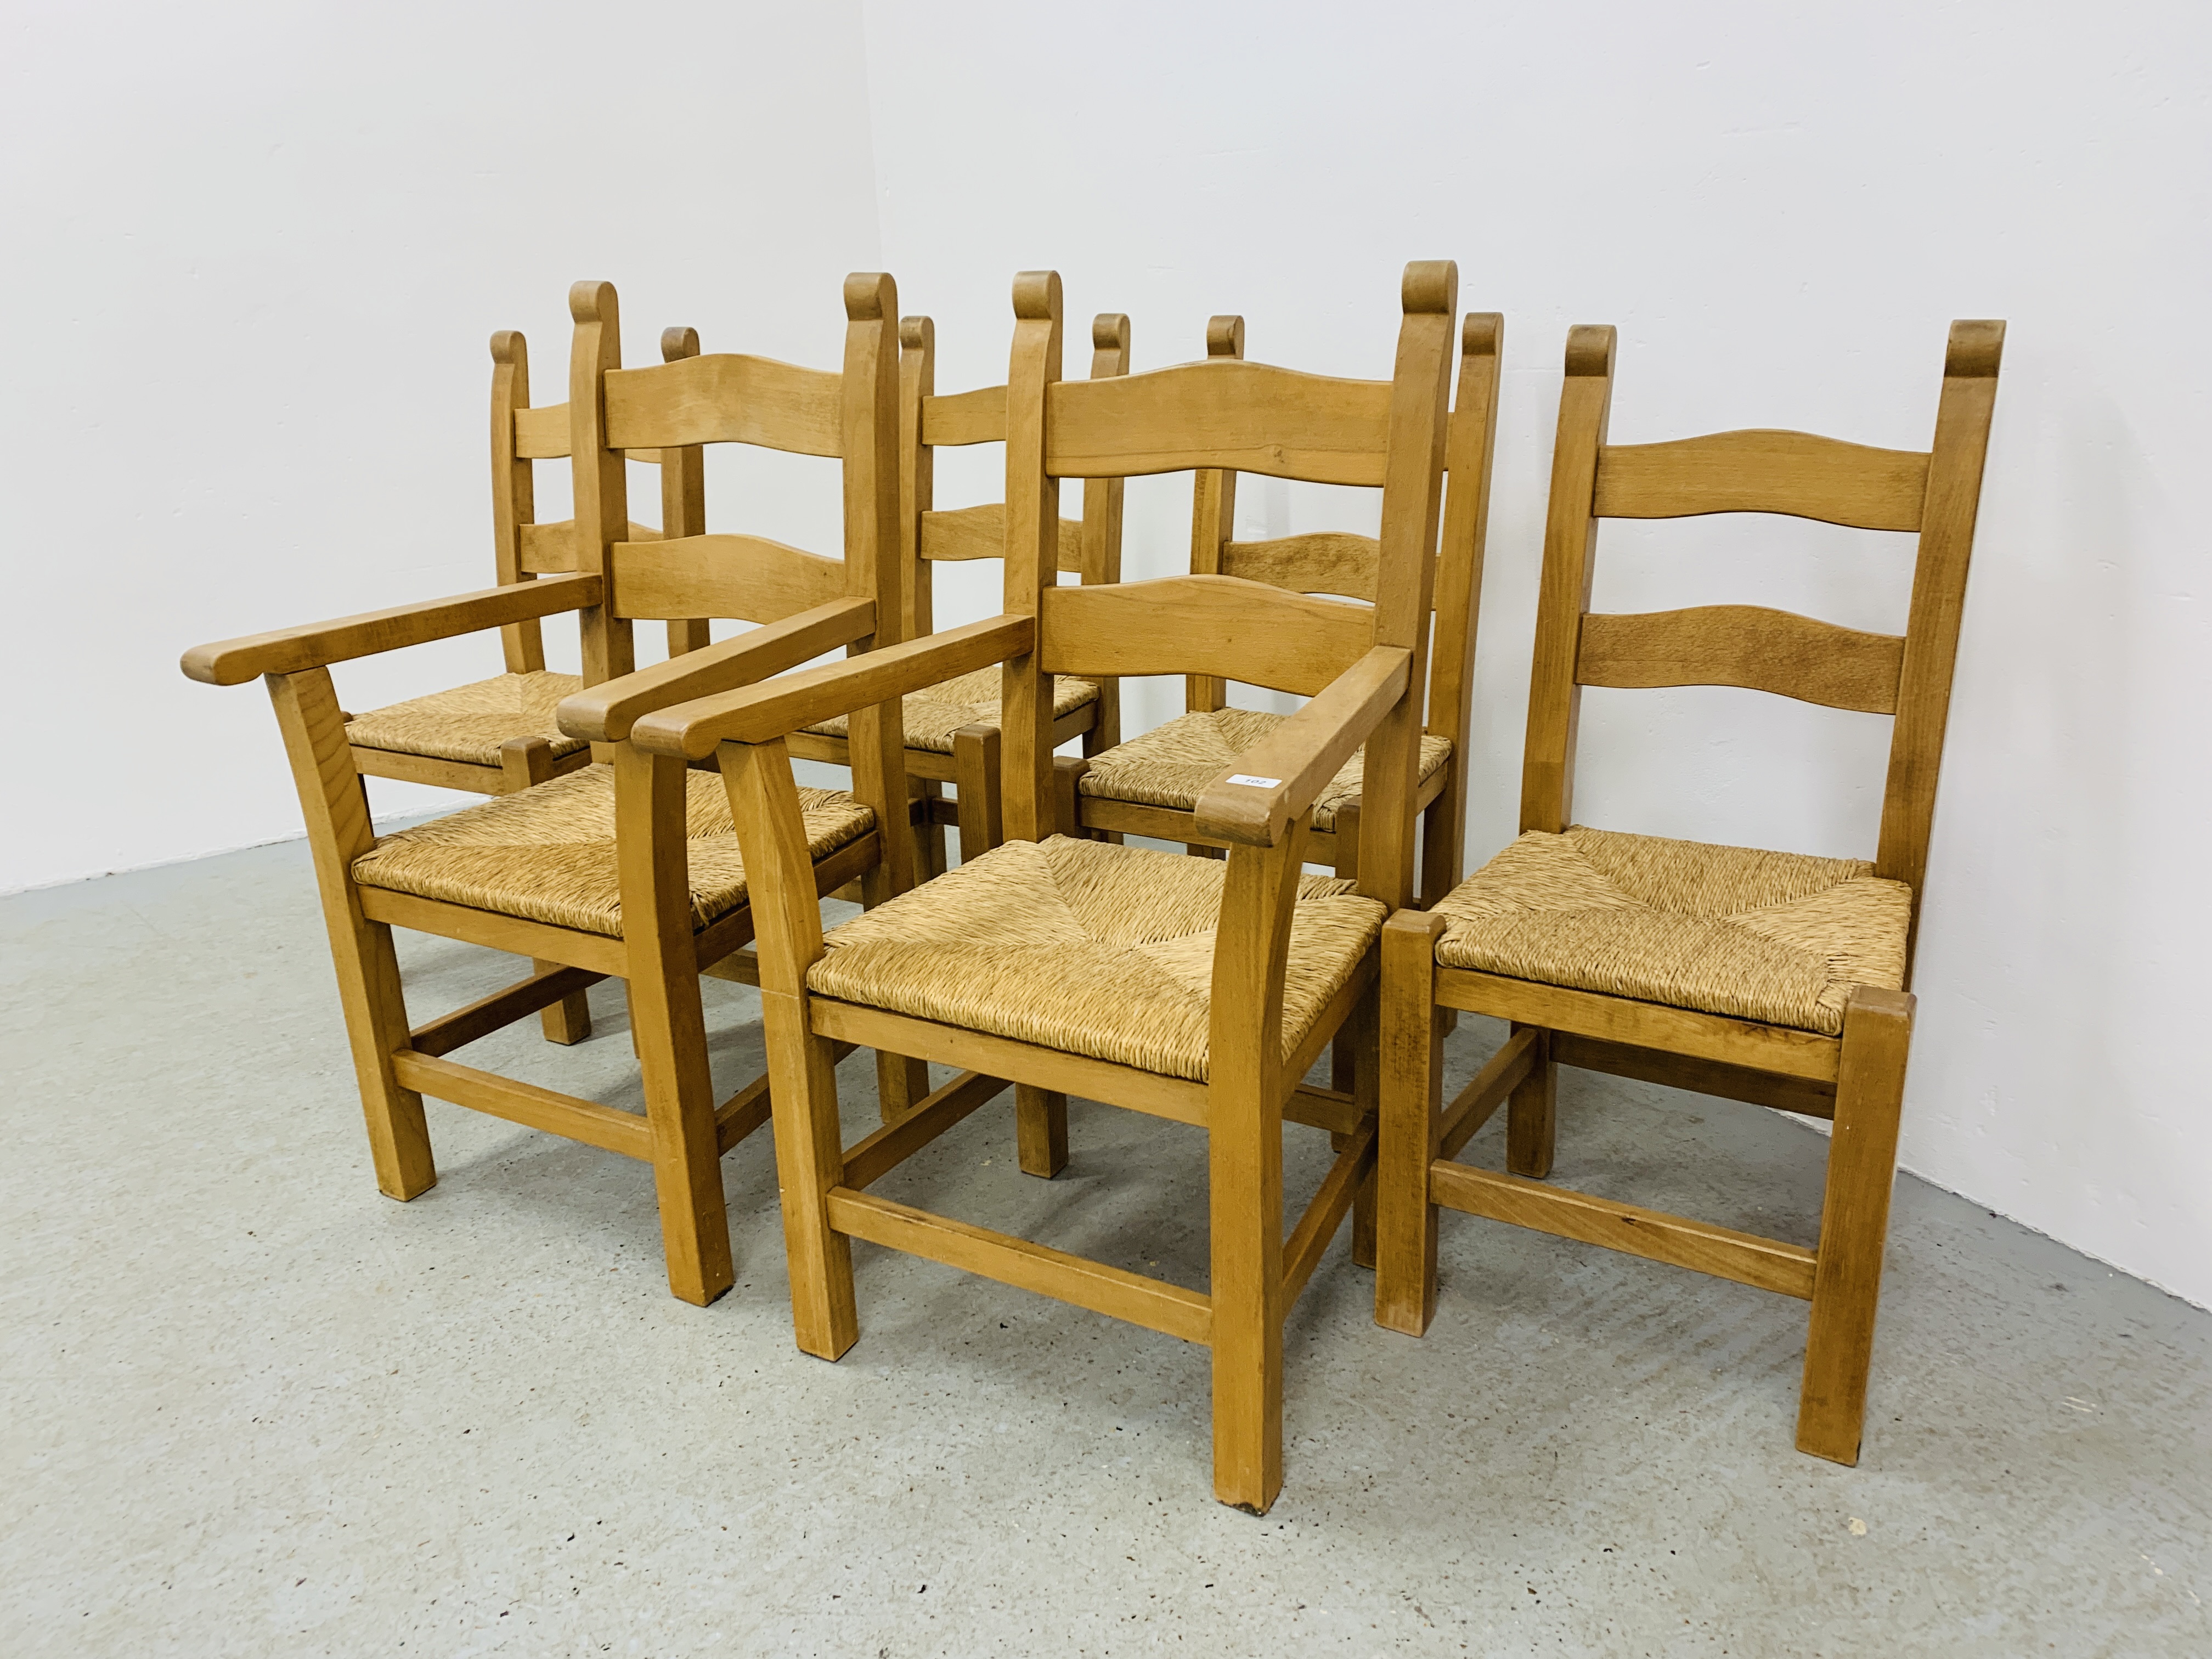 A SET OF SIX HEAVY QUALITY COUNTRY DINING CHAIRS WITH RUSH SEATS (4 SIDE,